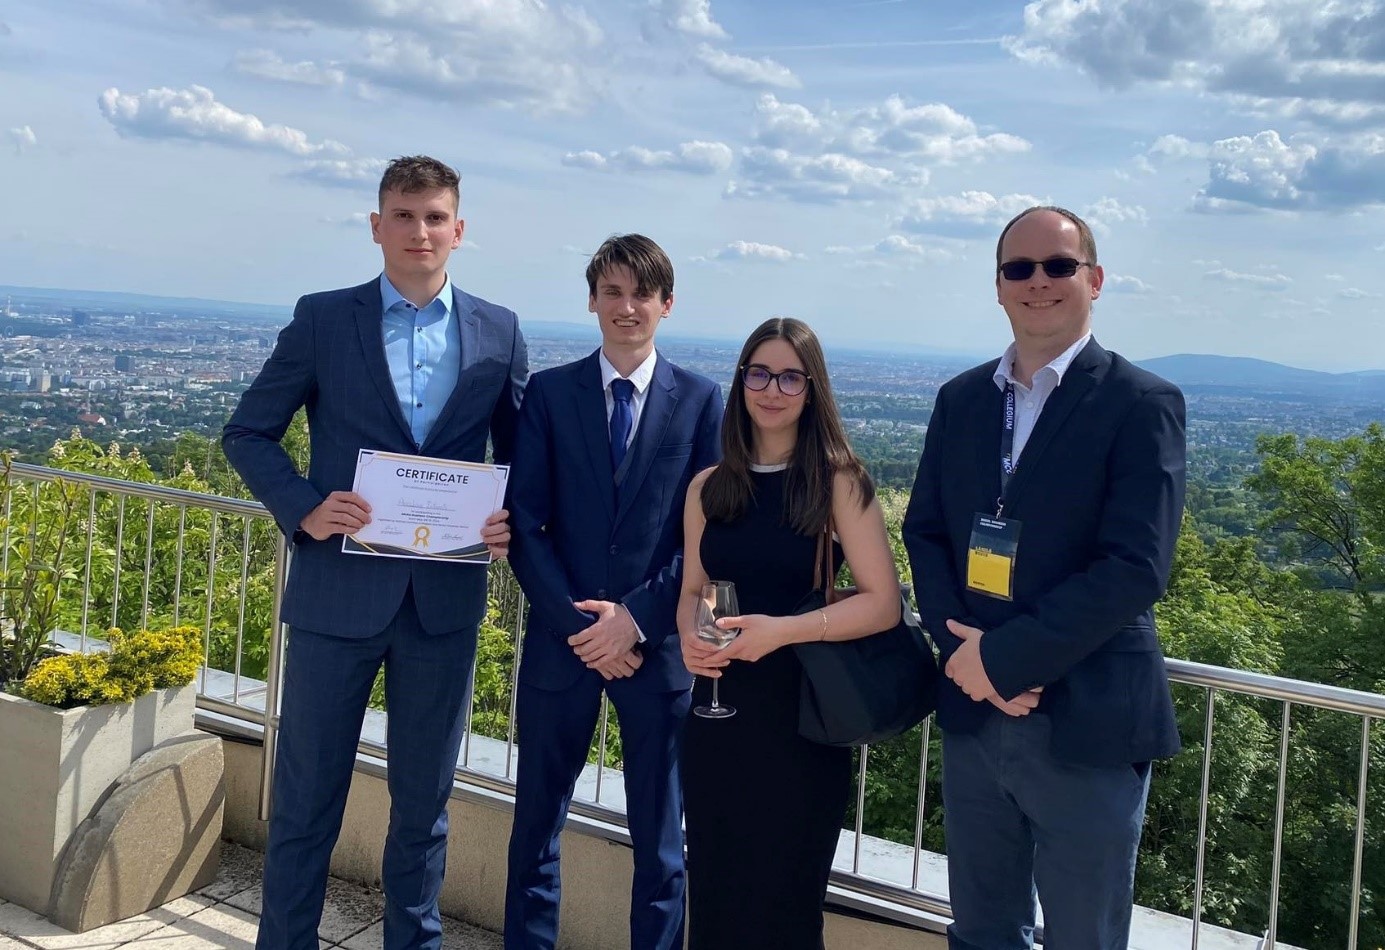 Students of Széchenyi István University at the finals of an international competition together with their mentor, dr. László Buics.